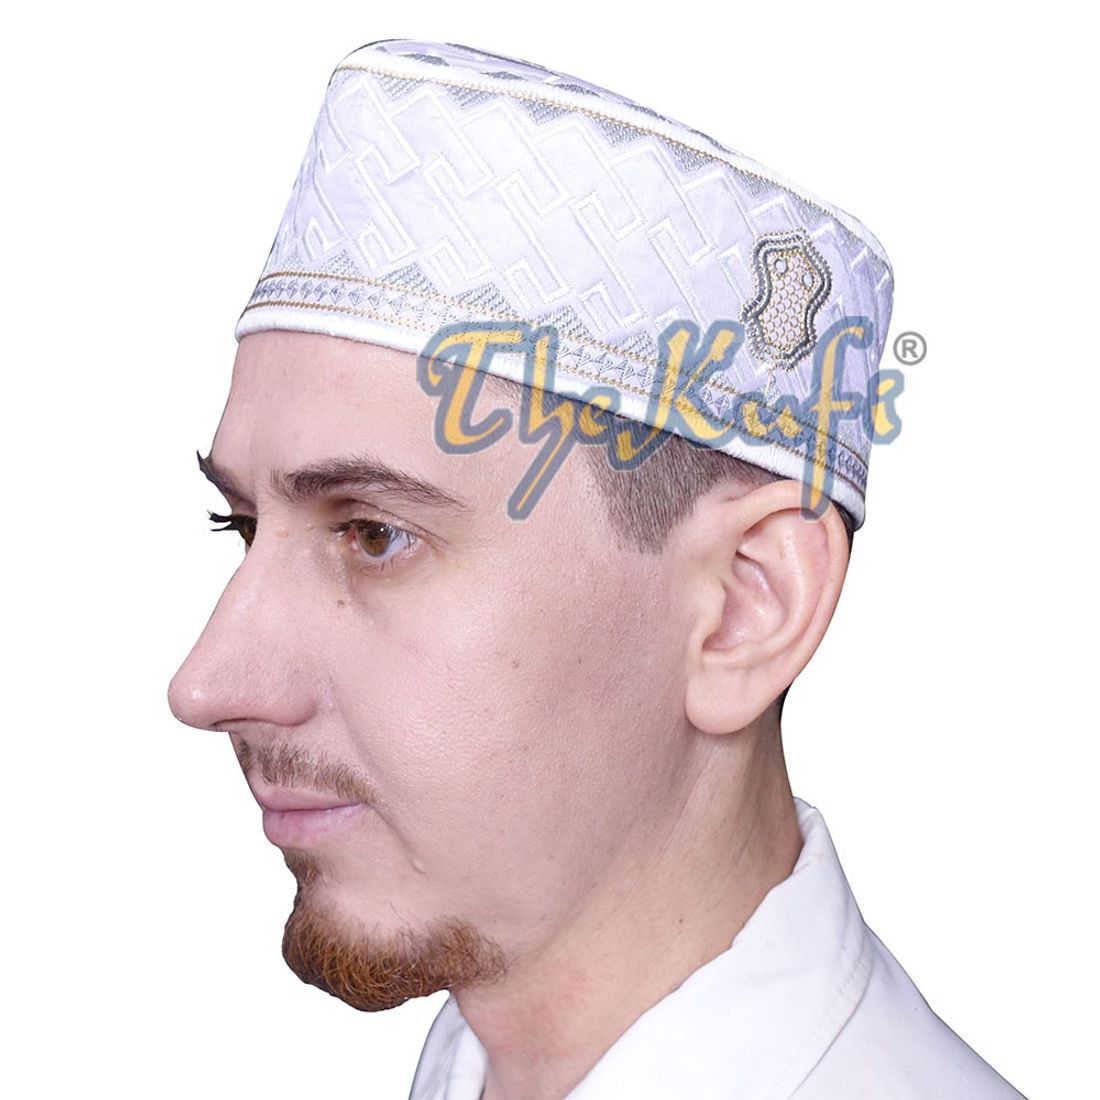 Prophet Muhammad Sandal Design Kufi Textured White Gray and Golden Ivory Embroidery